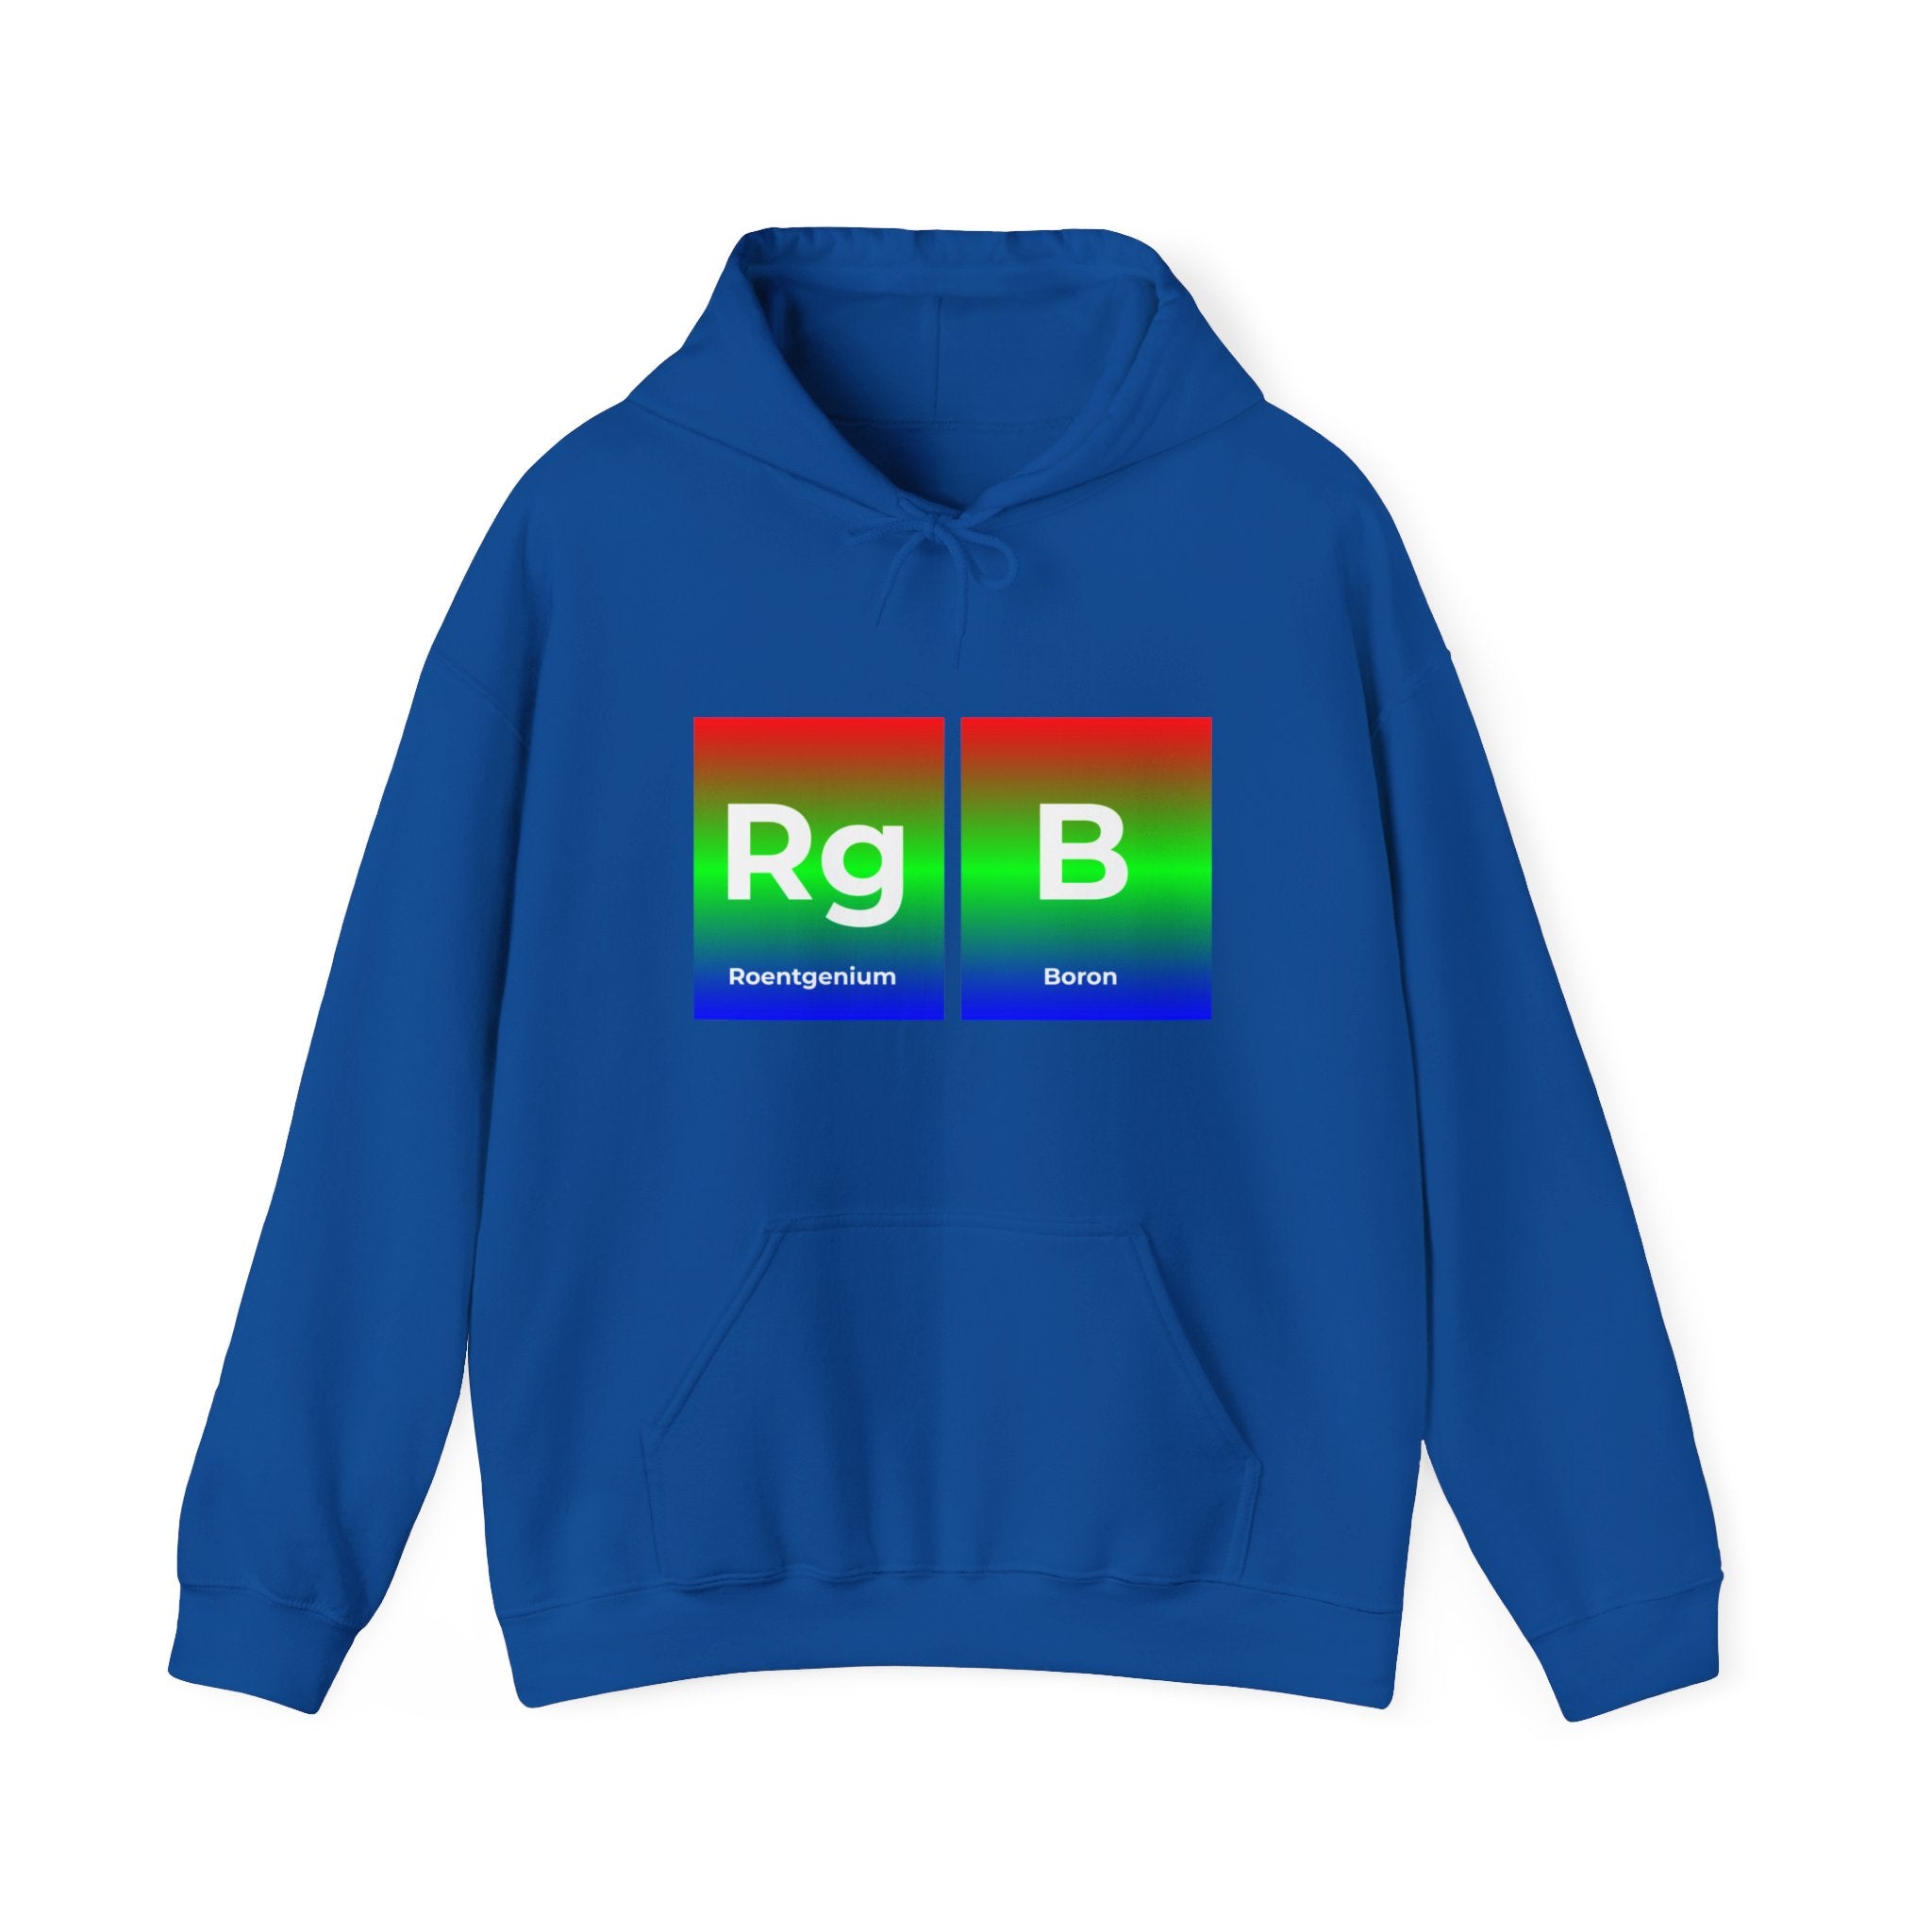 A comfortable blue RG-B - Hooded Sweatshirt featuring the elements Roentgenium (Rg) and Boron (B) from the periodic table, set against a striking red, green, and blue gradient background. This RG-B design seamlessly blends style and science.